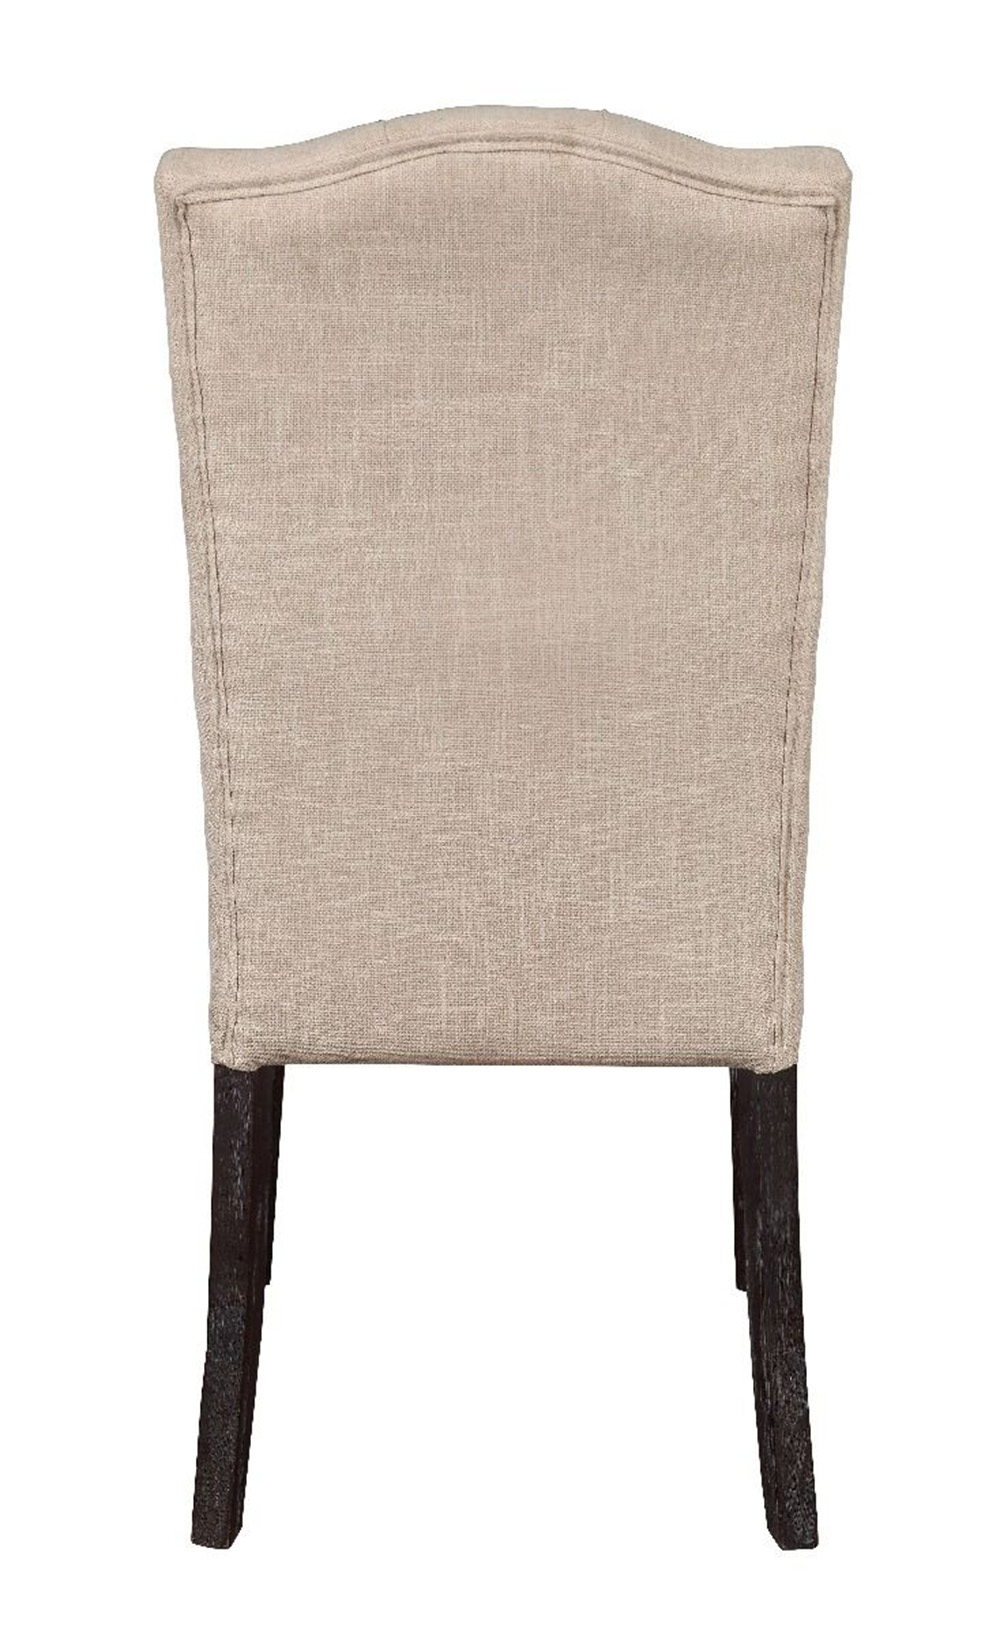 ACME Gerardo Linen Upholstered Dining Chair Set of 2, with High Backrest, and Wooden Legs, for Restaurant, Cafe, Tavern, Office, Living Room - Beige